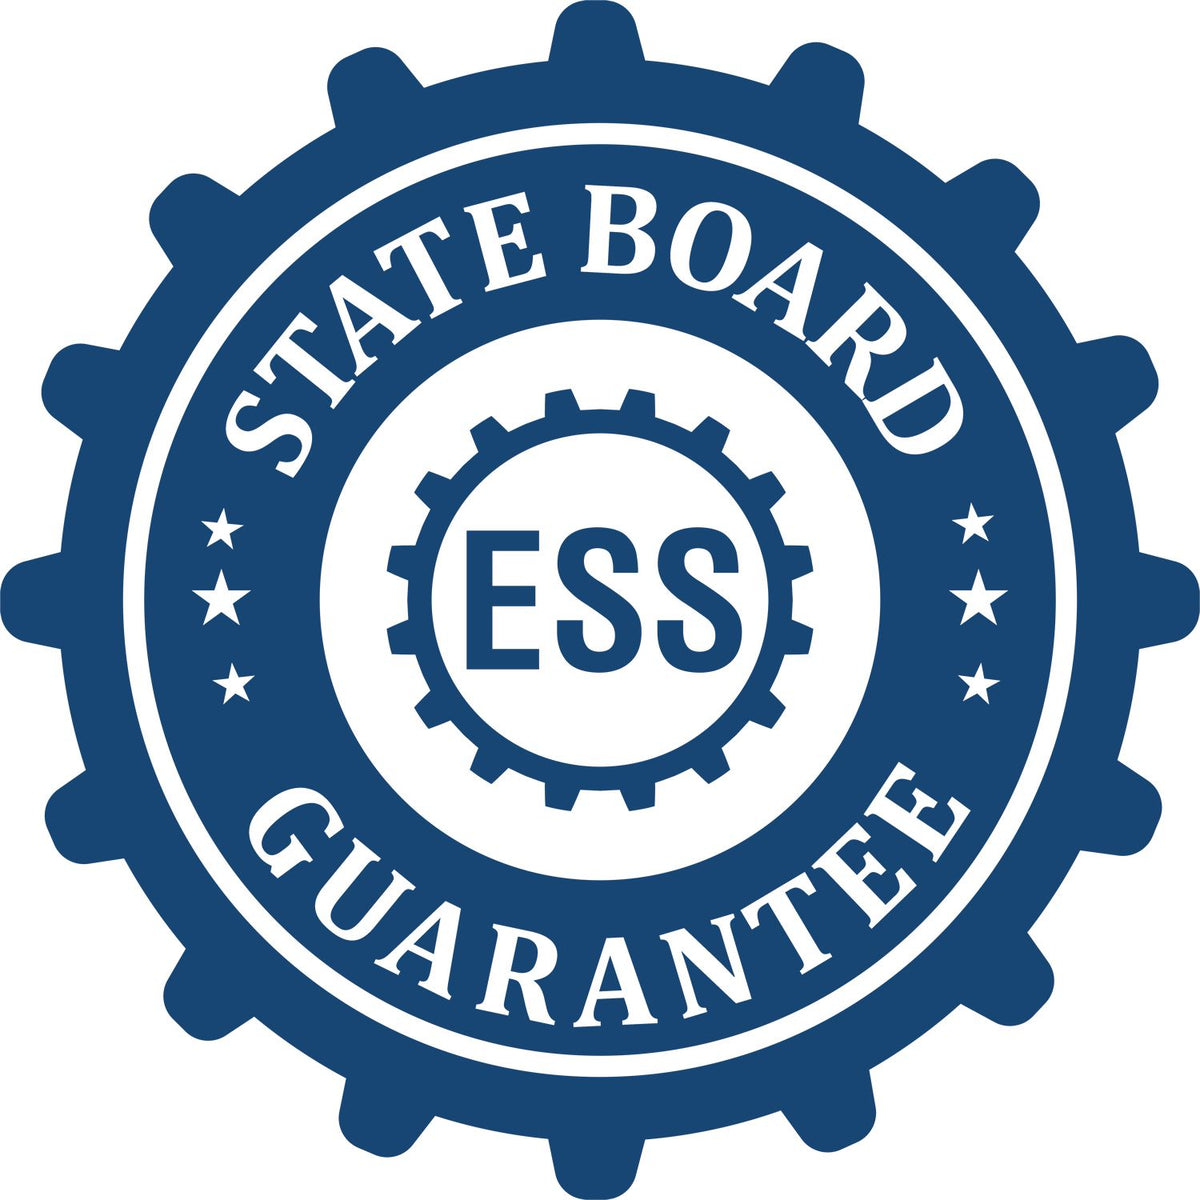 An emblem in a gear shape illustrating a state board guarantee for the Rhode Island Professional Geologist Seal Stamp